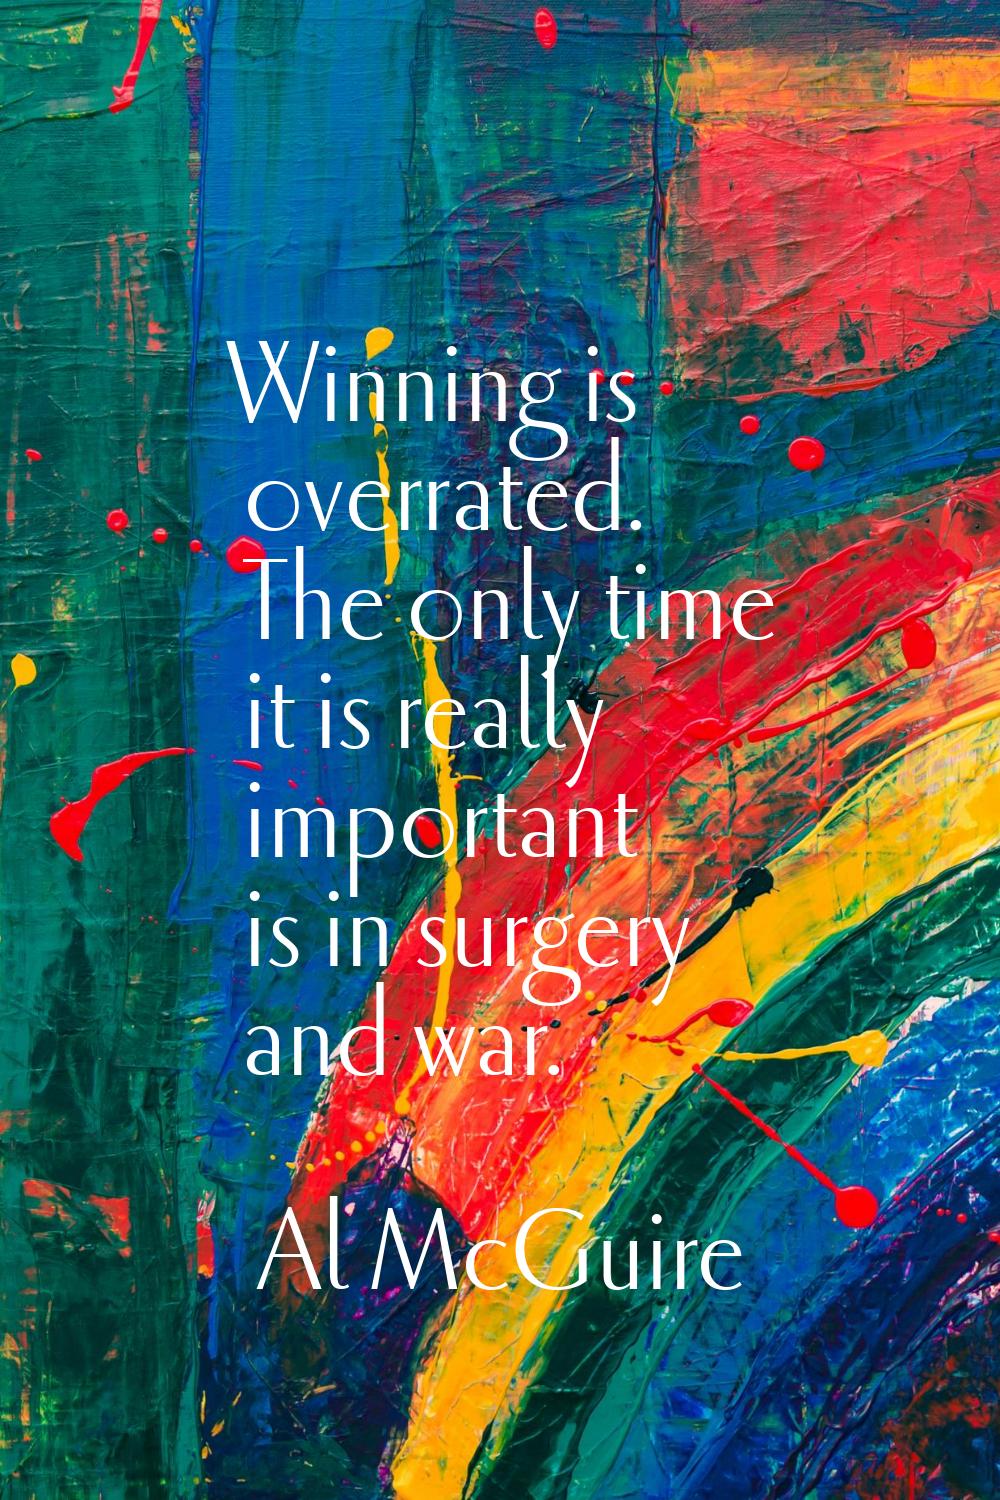 Winning is overrated. The only time it is really important is in surgery and war.